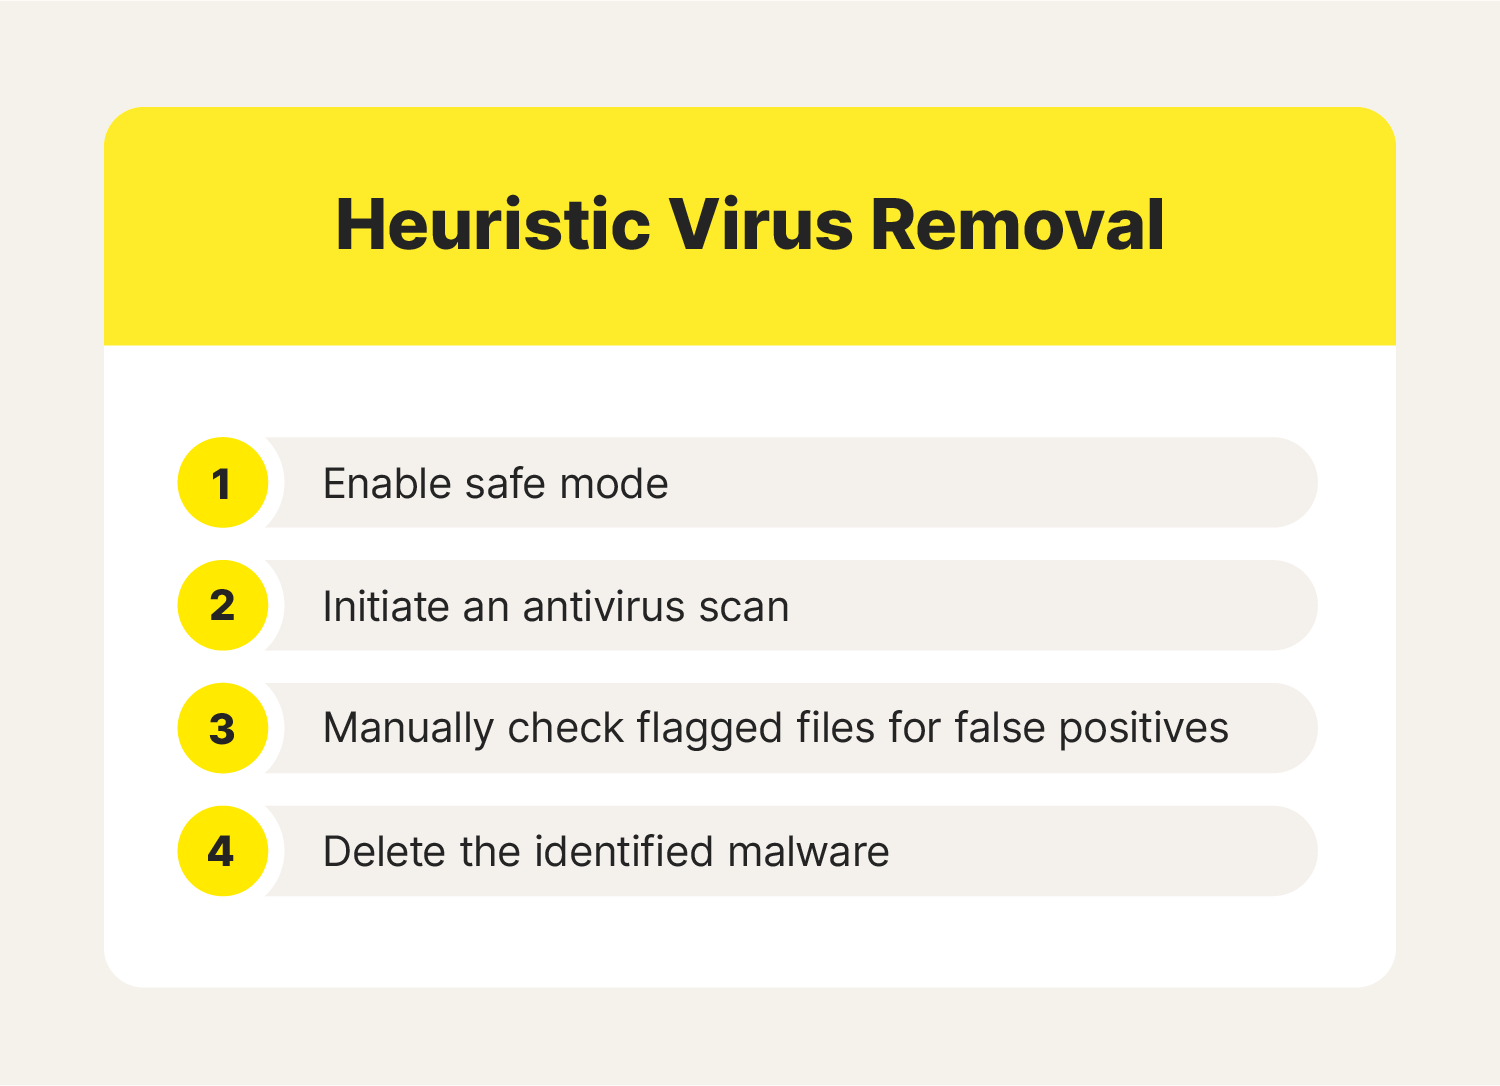 To remove a heuristic virus, enable safe mode, initiate an antivirus scan manually check flagged files for false positives, and delete the identified malware. 